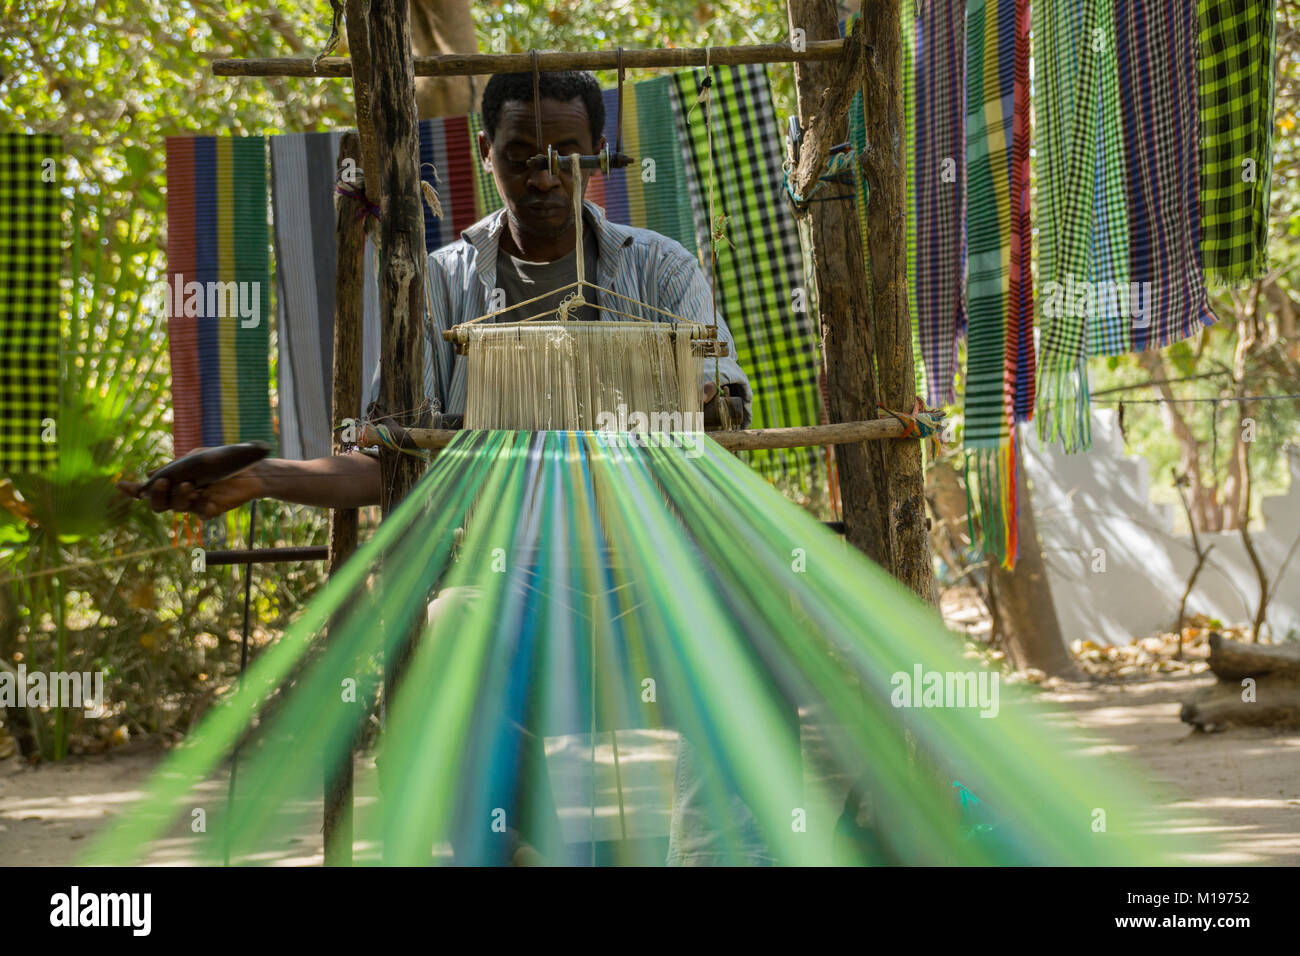 An african male shows traditional weaving in Makasutu forest, The Gambia, Africa Stock Photo